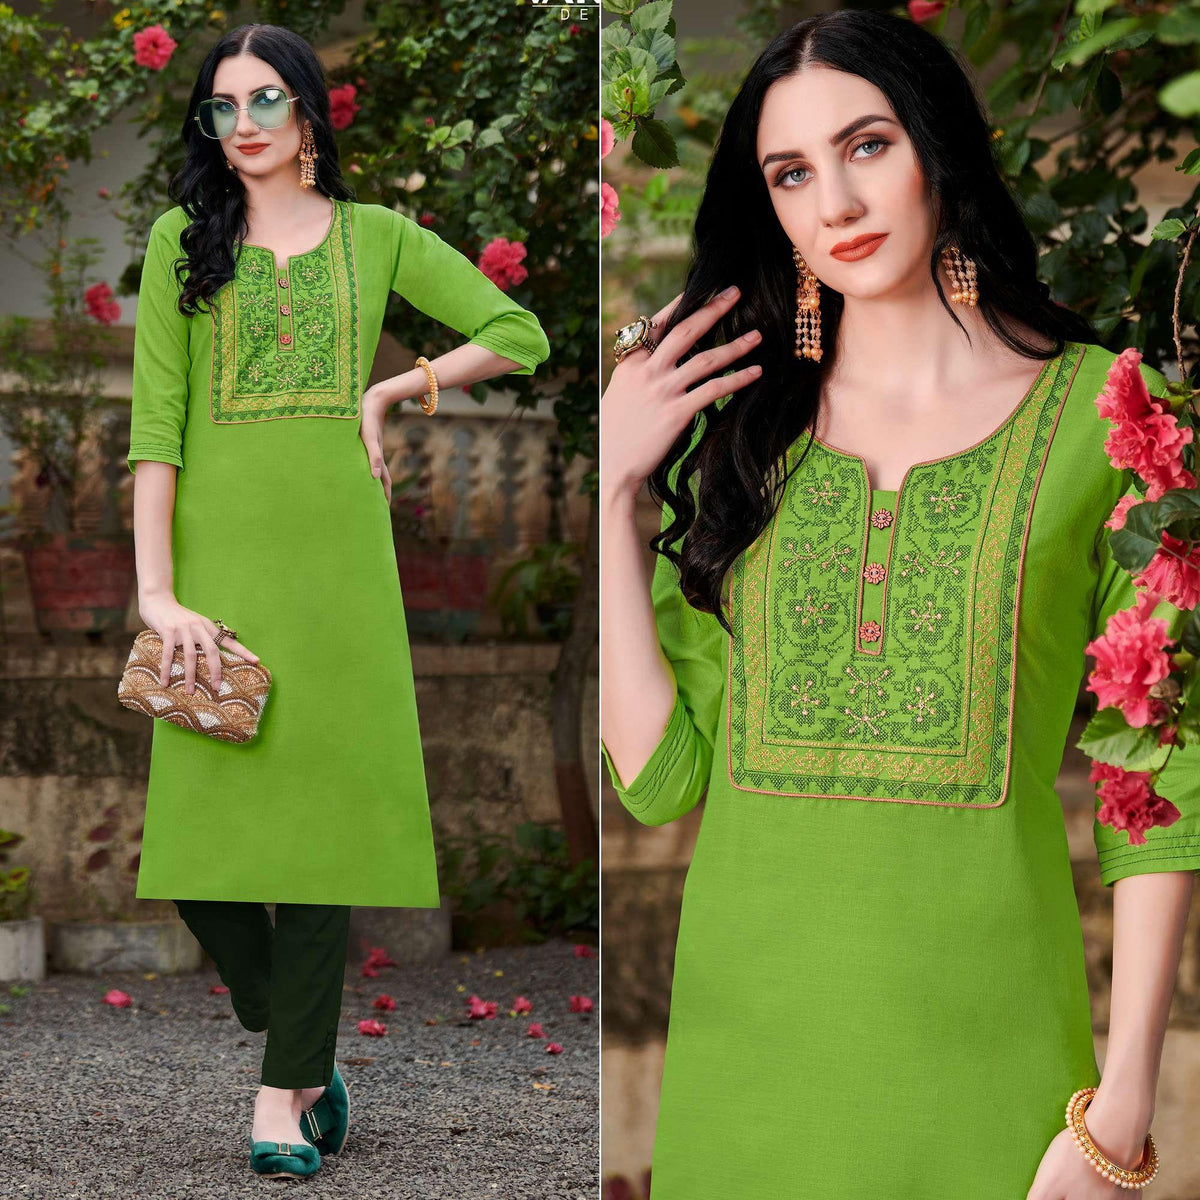 Vastraa Fusion Women's Cotton Solid Kurti - (Parrot Green) Manufacturer  Supplier from Delhi India